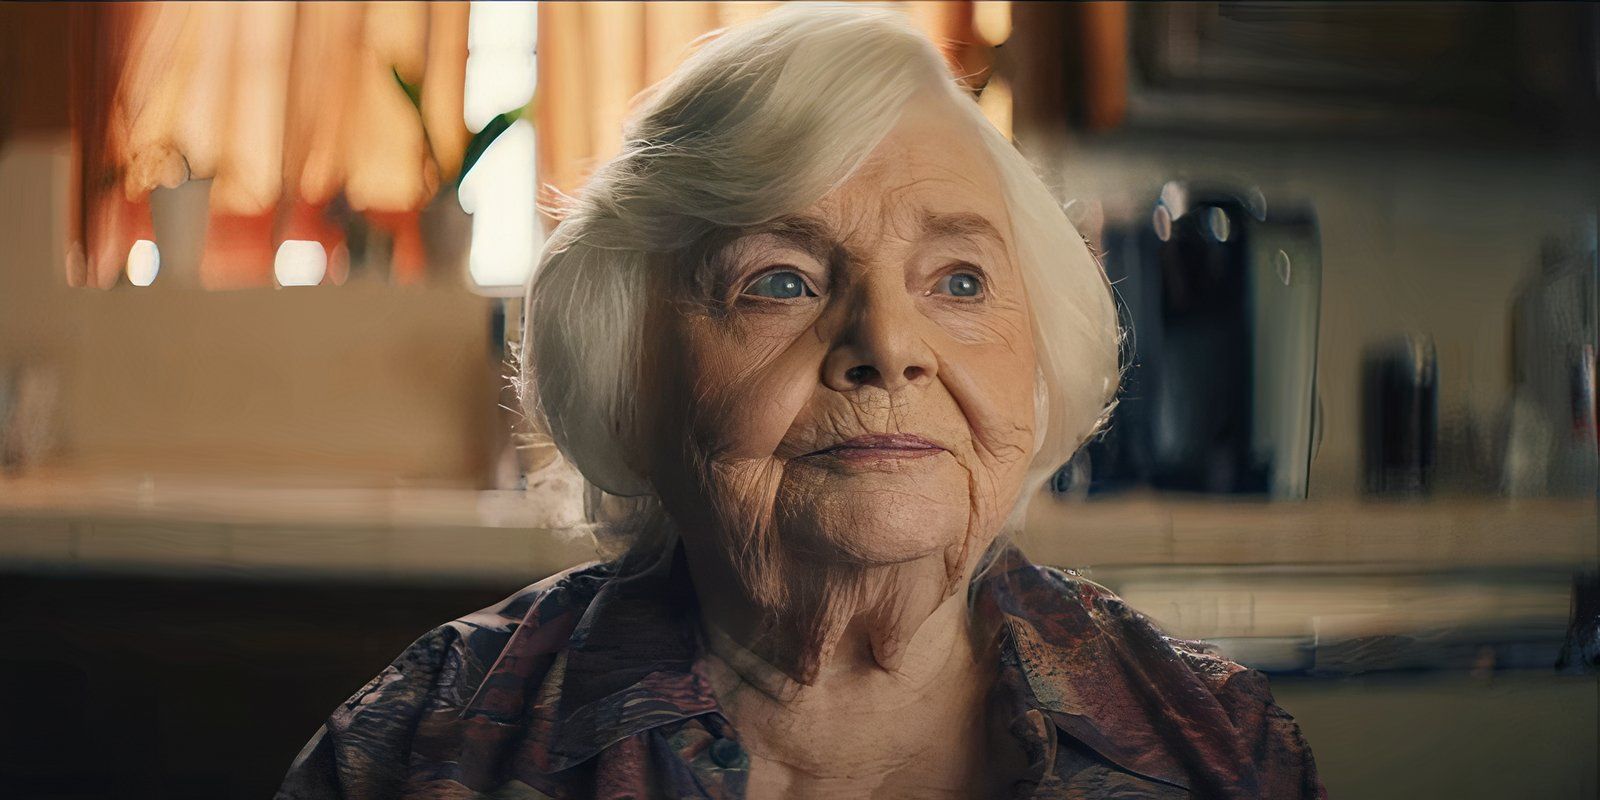 June Squibb as Thelma in a kitchen in Thelma